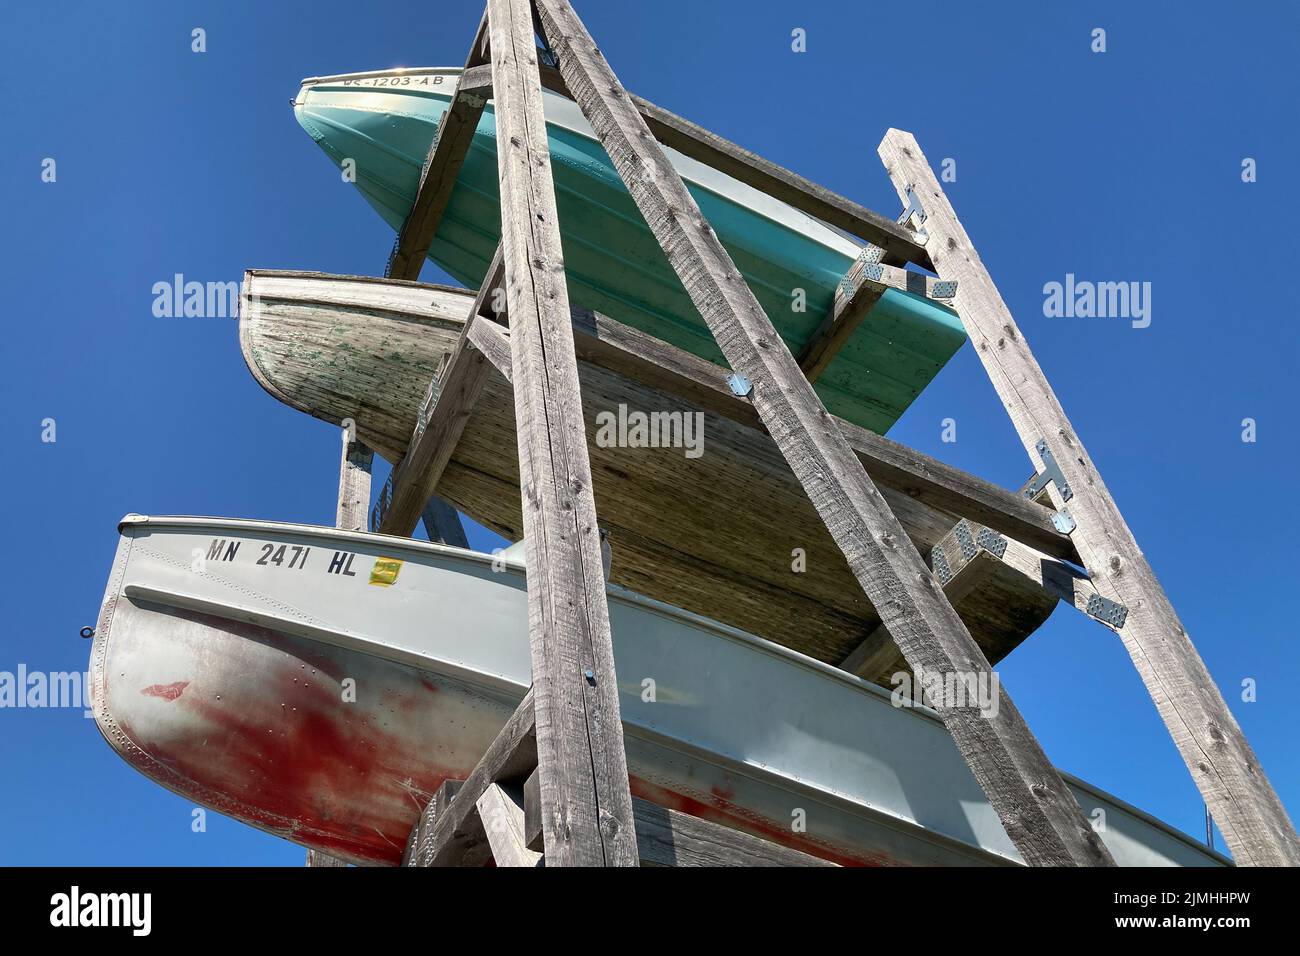 FRANCONIA, MN, USA - AUGUST 5, 2022: Franconia Boat Tower at Franconia Sculpture Park. Stock Photo